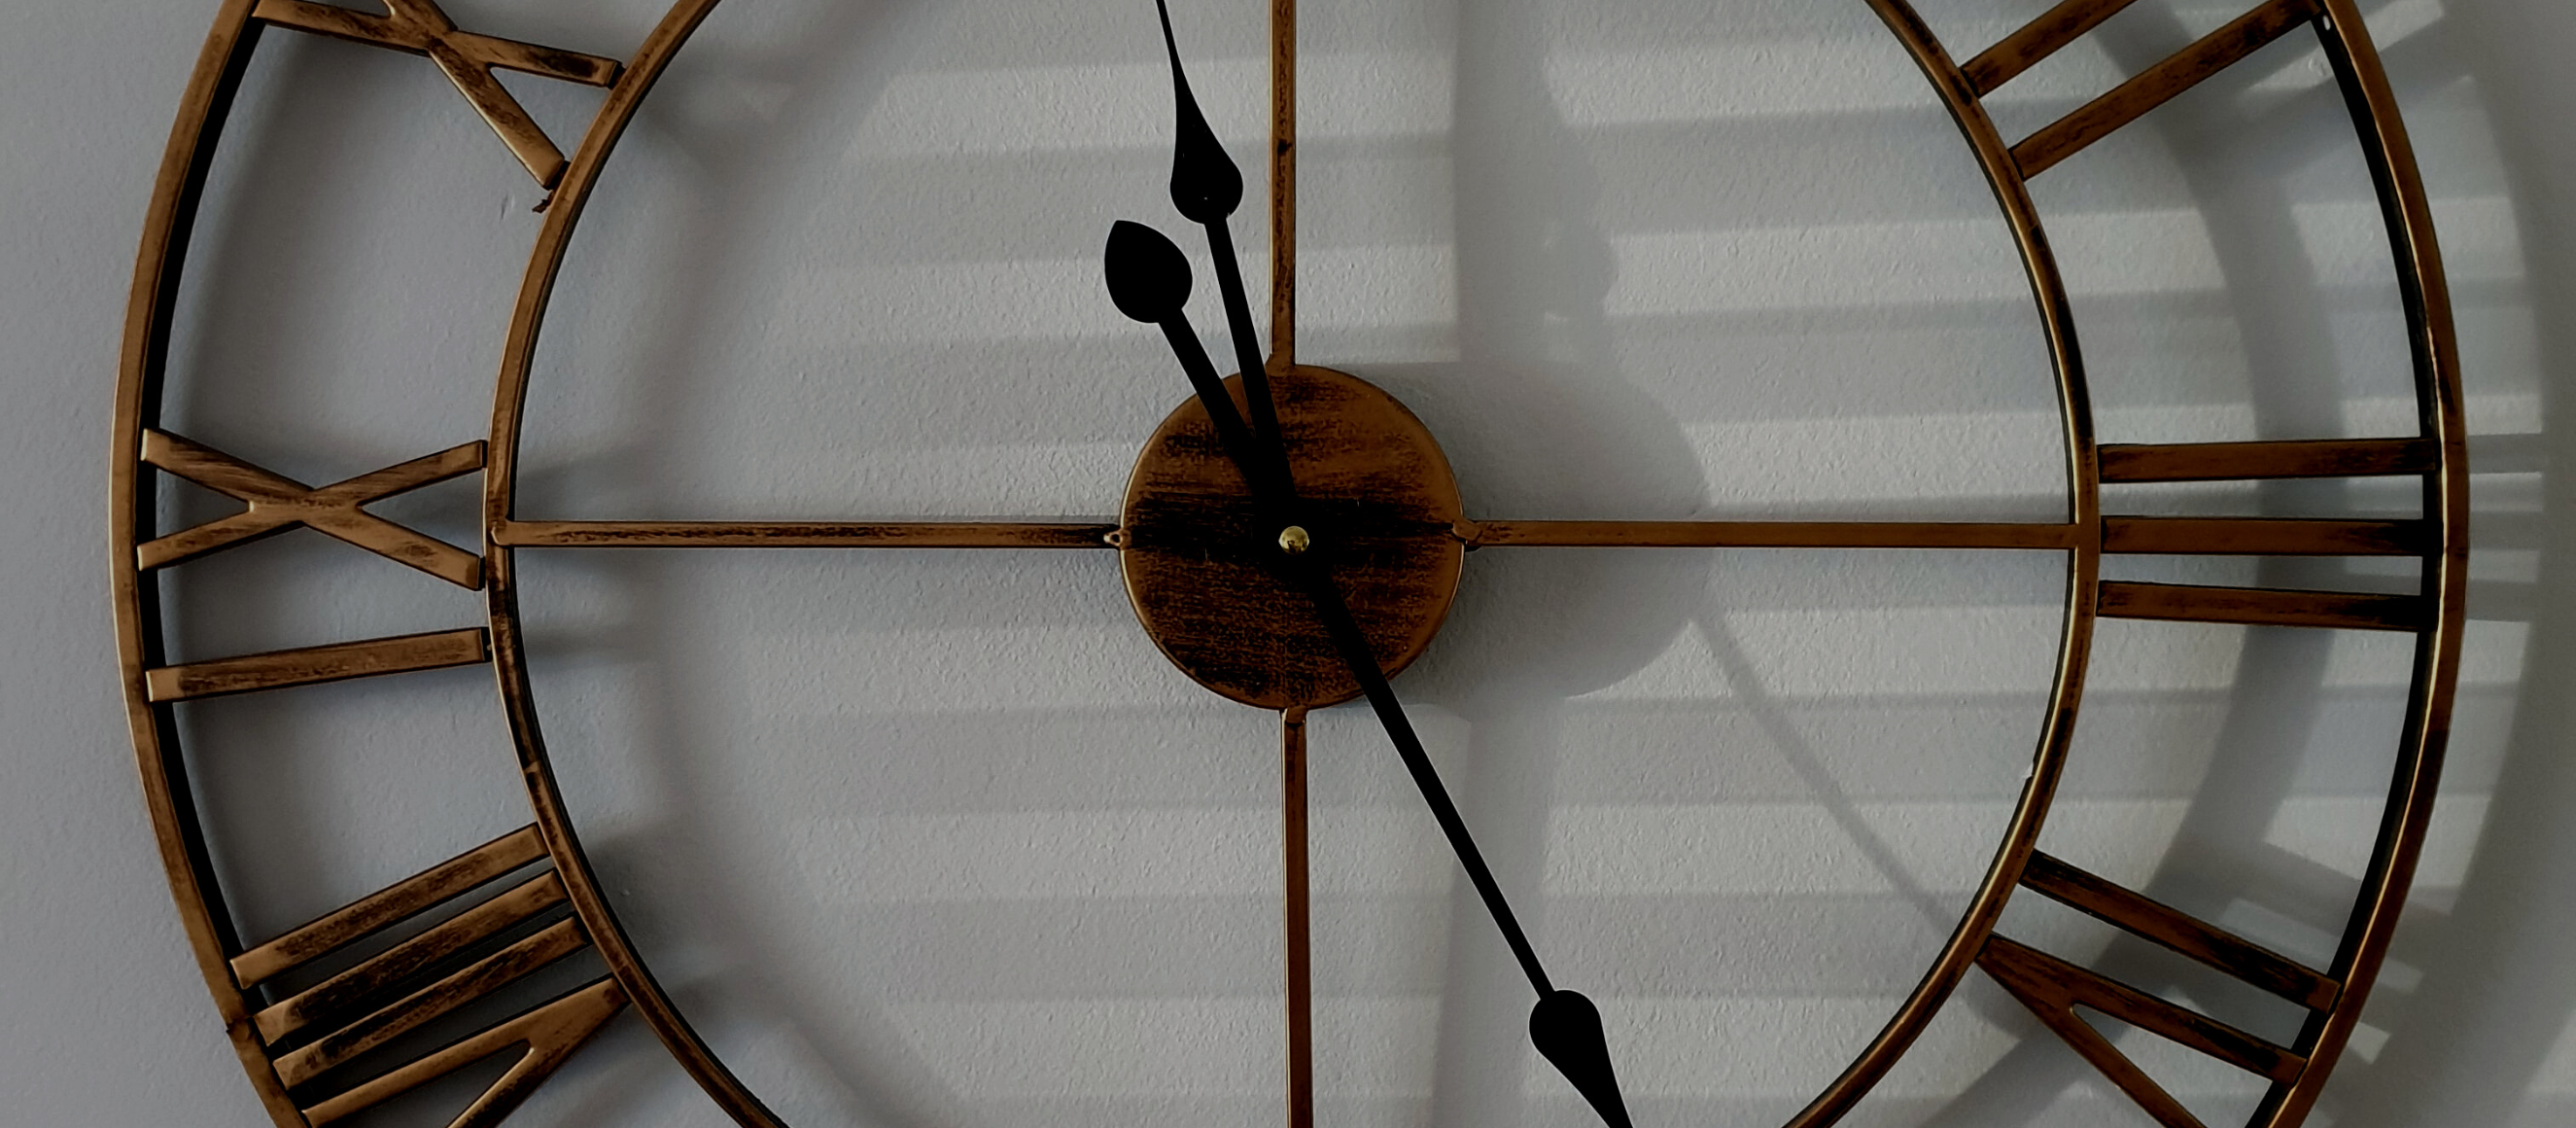 Photo of a large, metal roman numeral clock with shadows cast on the wall behind it